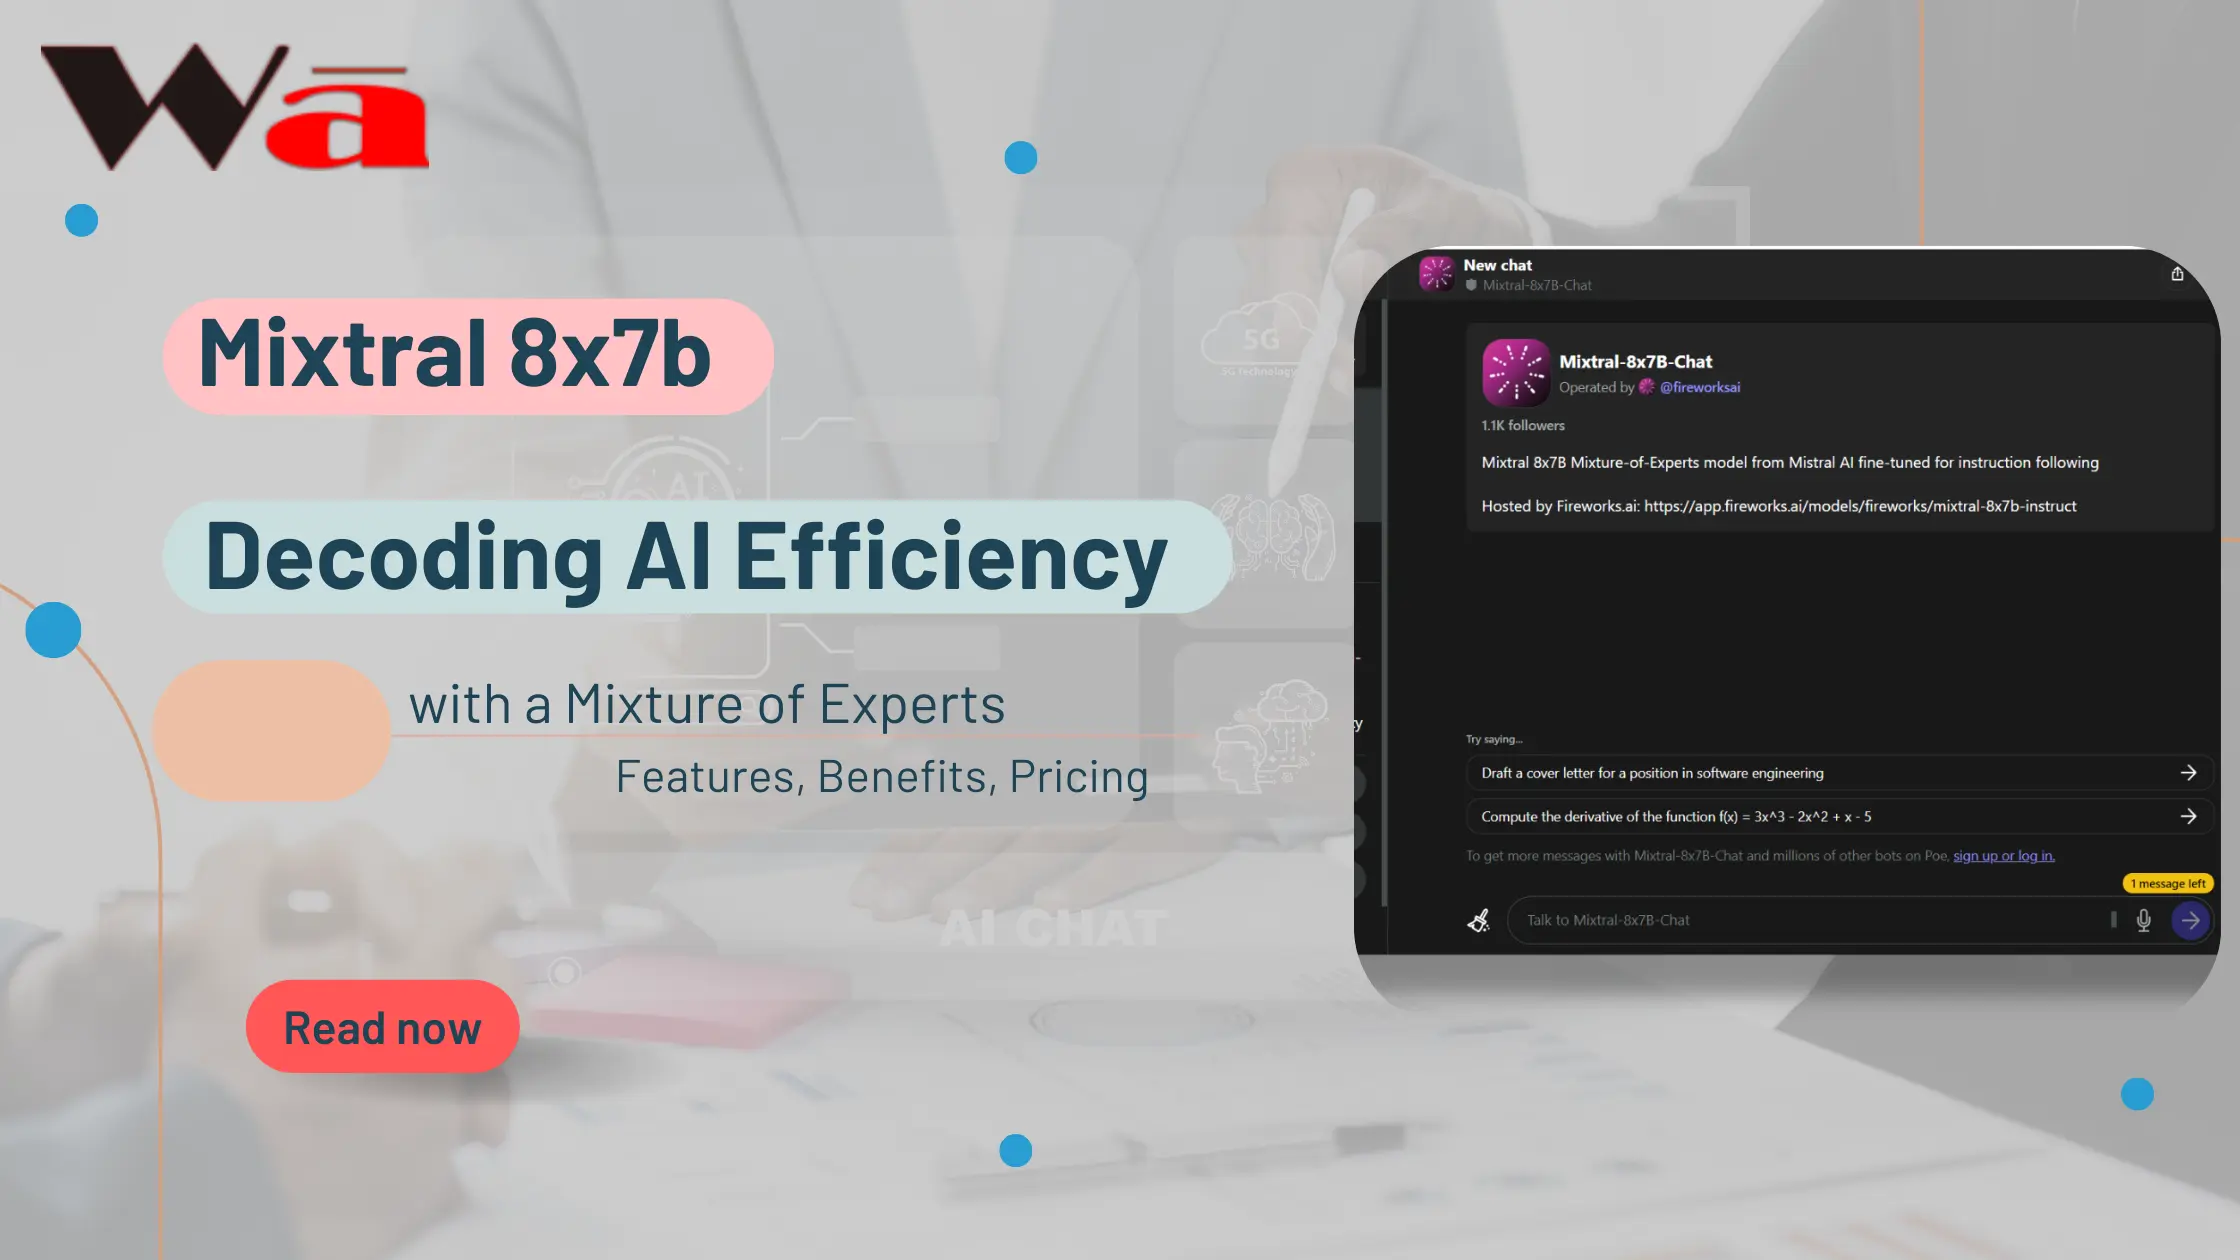 Mixtral 8x7b Decoding AI Efficiency with a Mixture of Experts